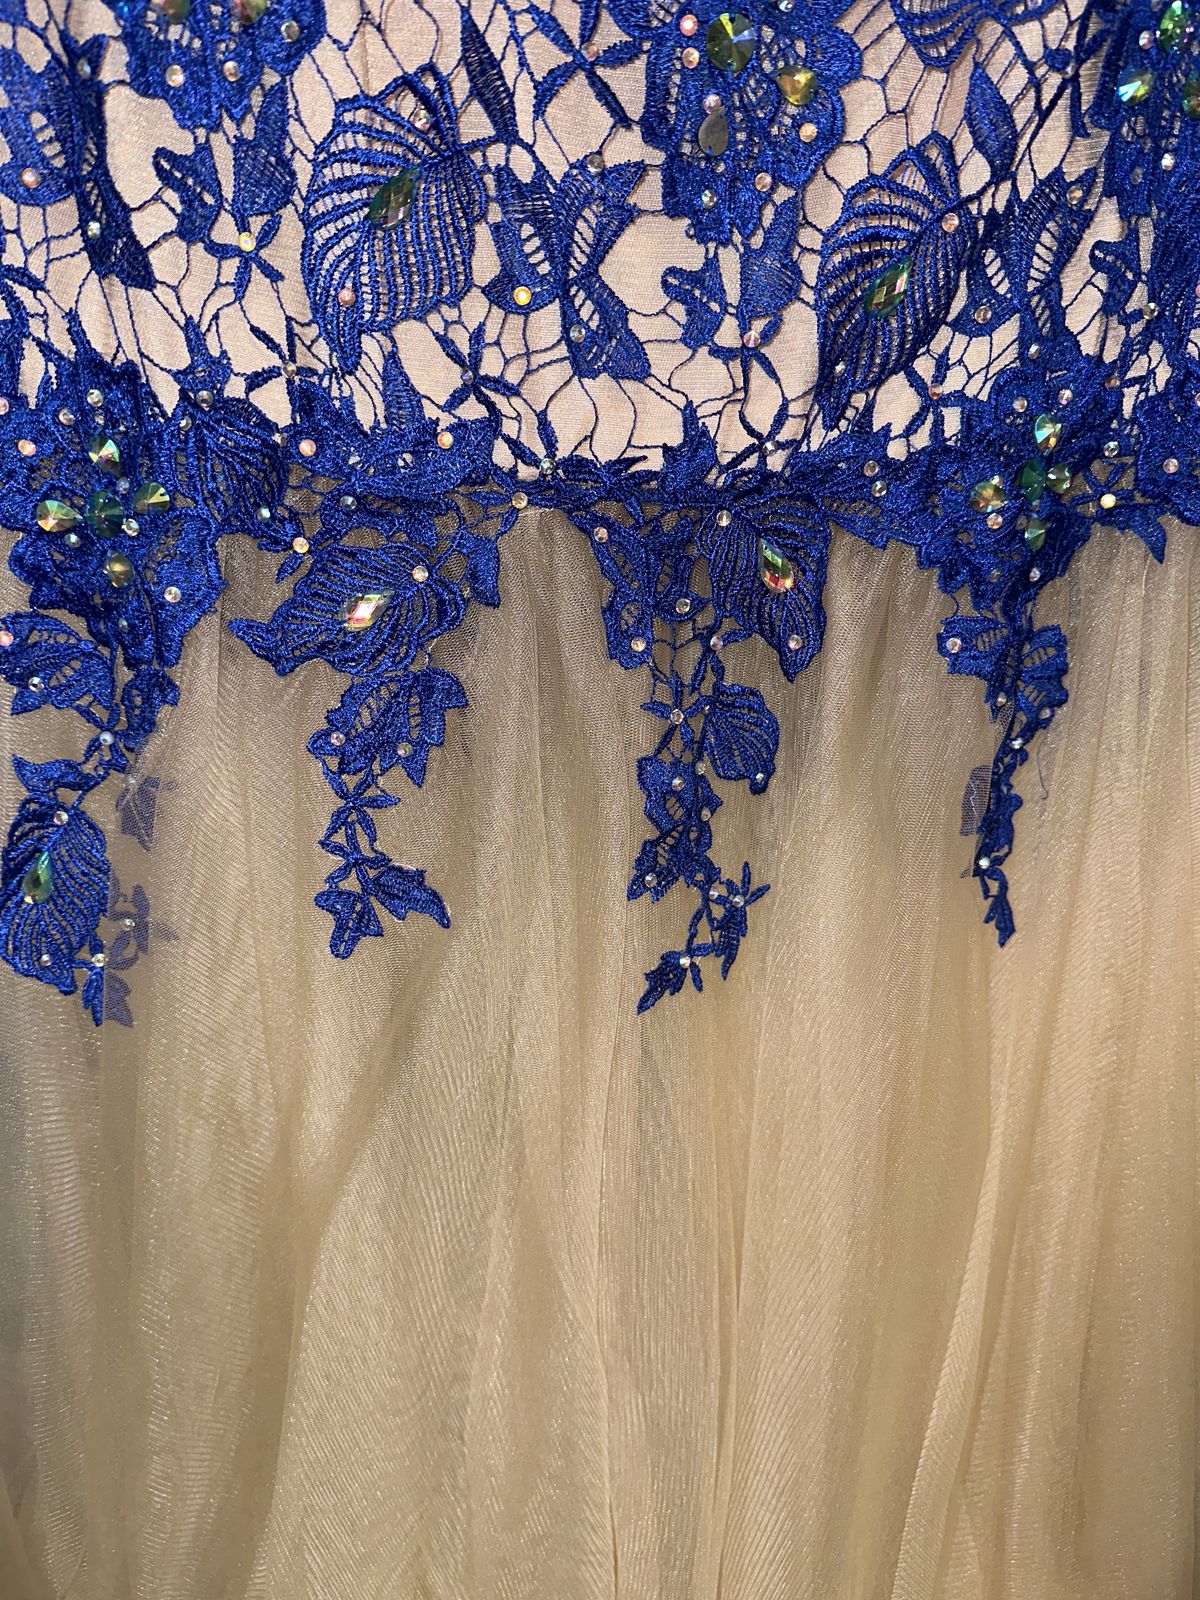 Size 12 Lace Royal Blue Mermaid Dress on Queenly